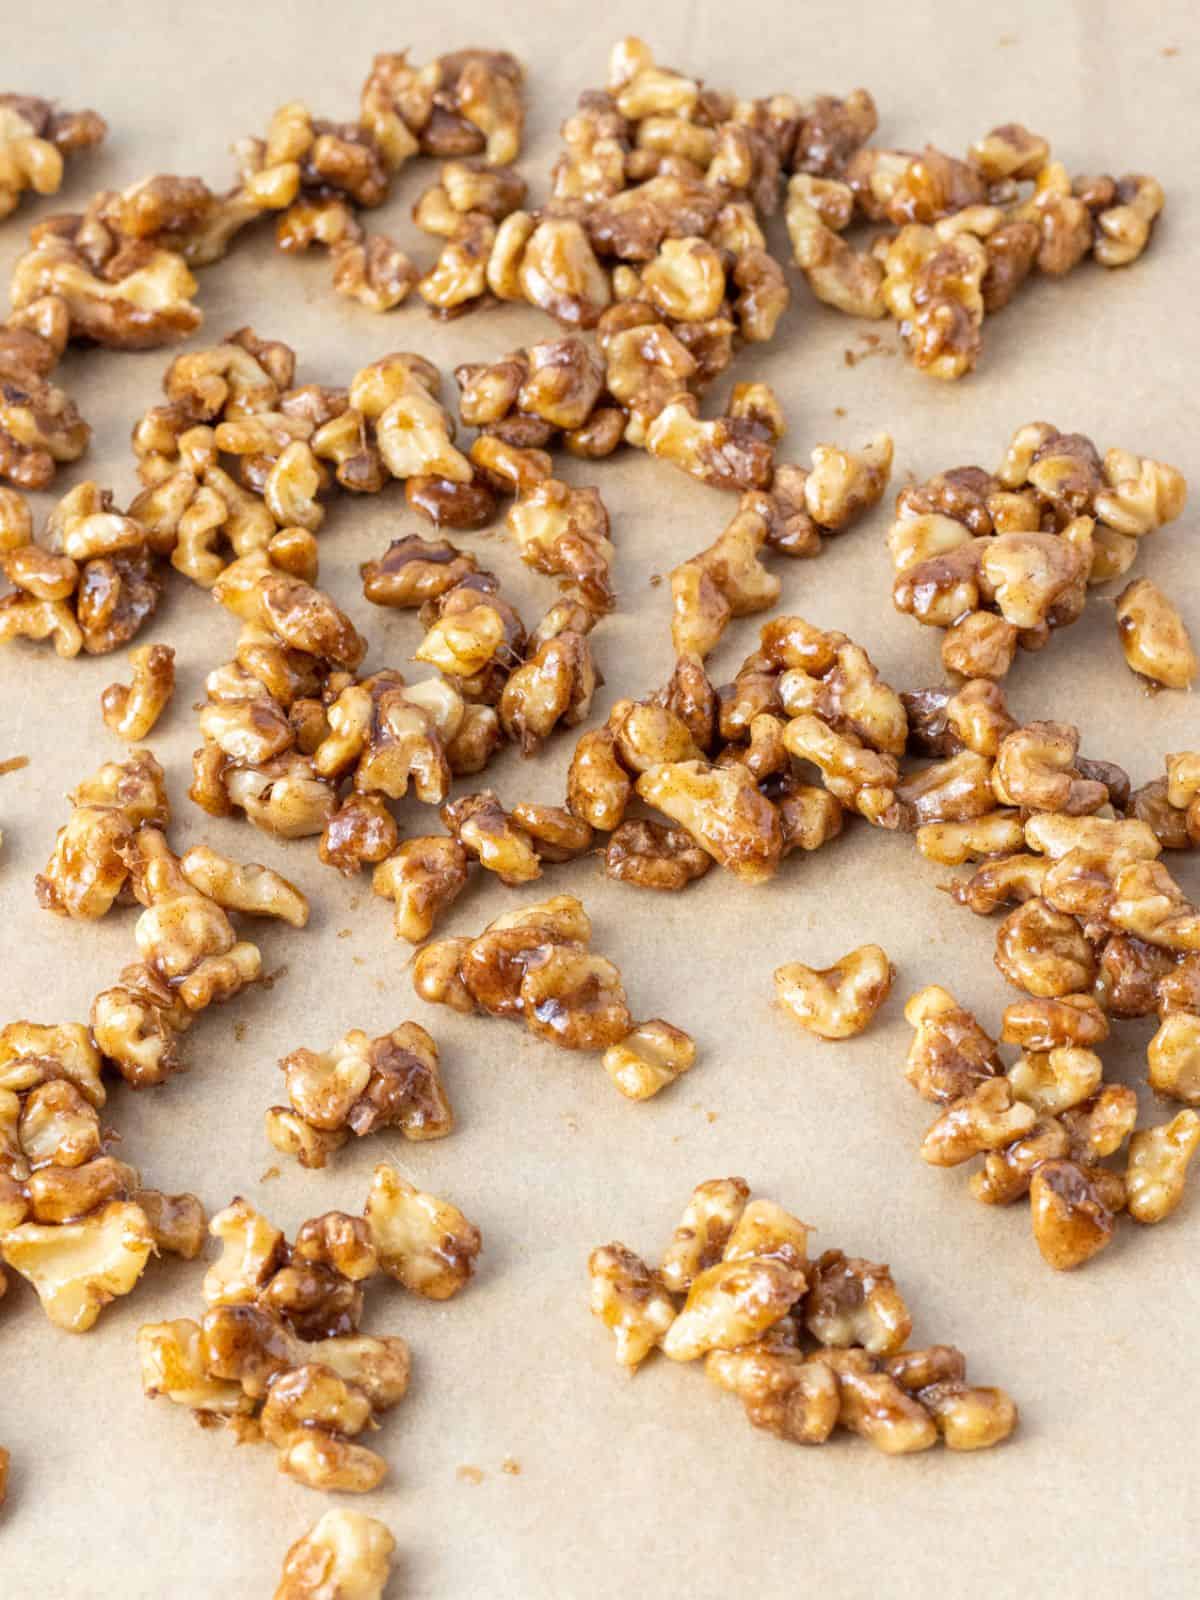 Candied walnuts spread out on parchment paper.